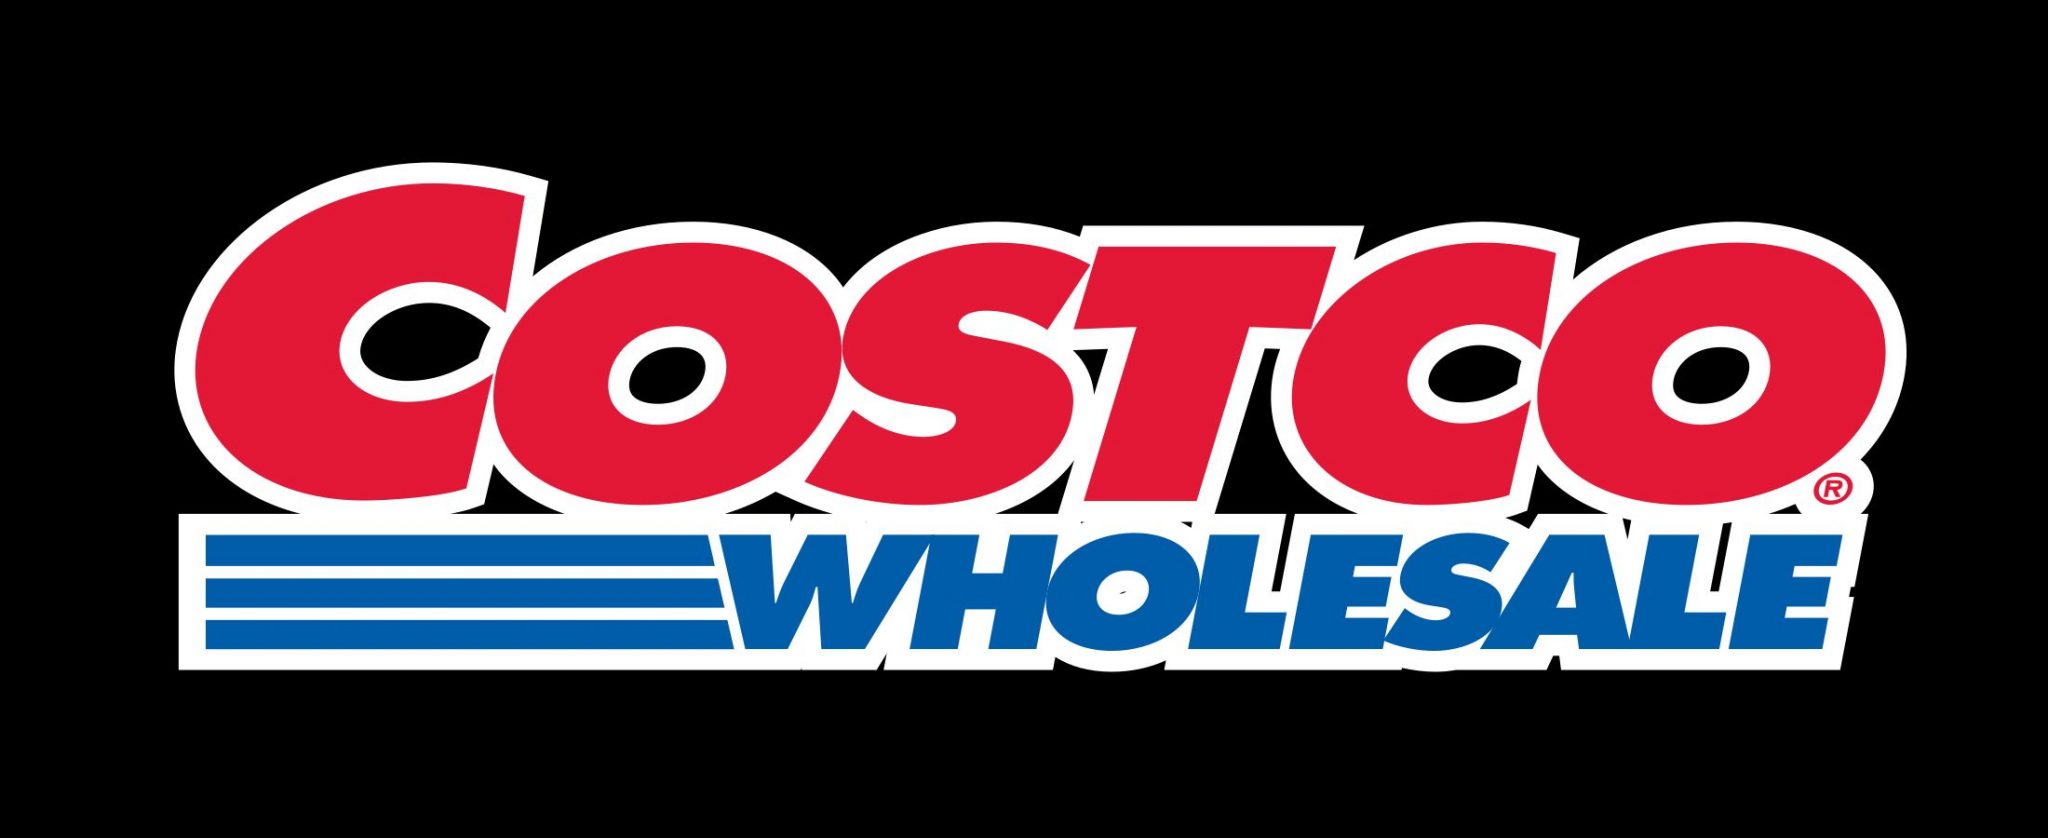 Costco Wholesale Corporation Reports Fourth Quarter And Fiscal Year 2020 Operating Results image